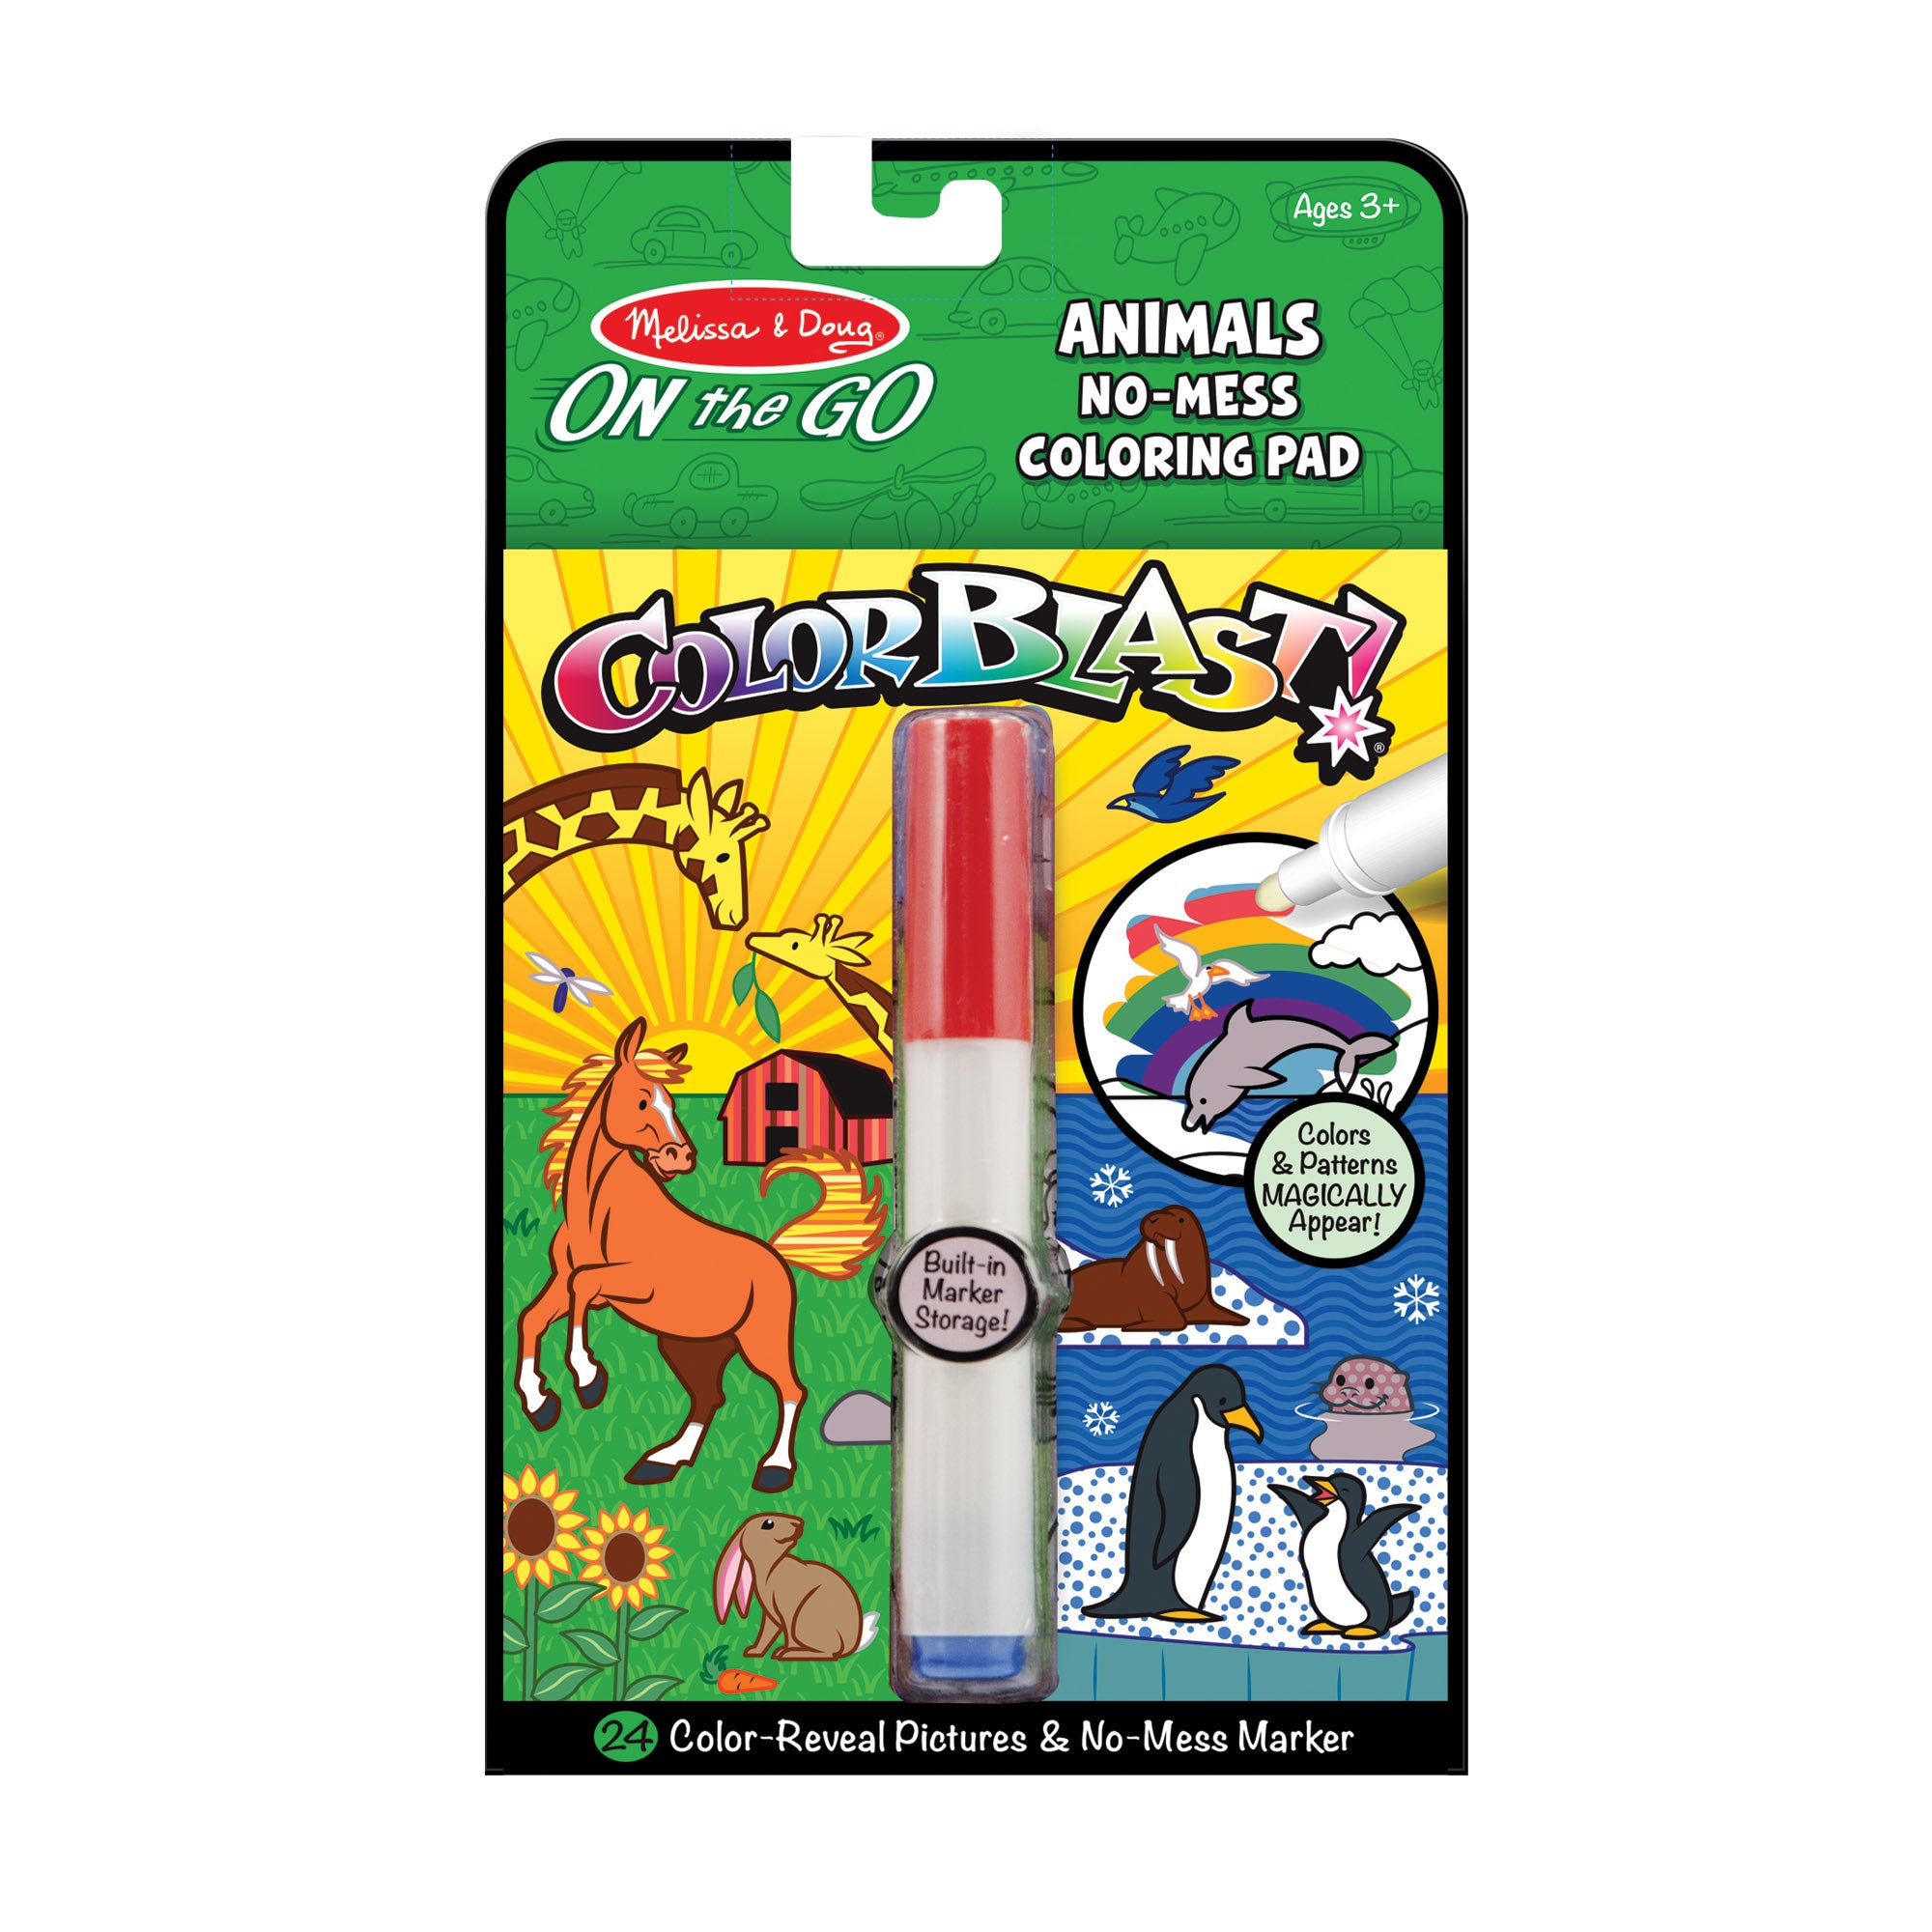 On the Go Colorblast No Mess Coloring Pad -Animals